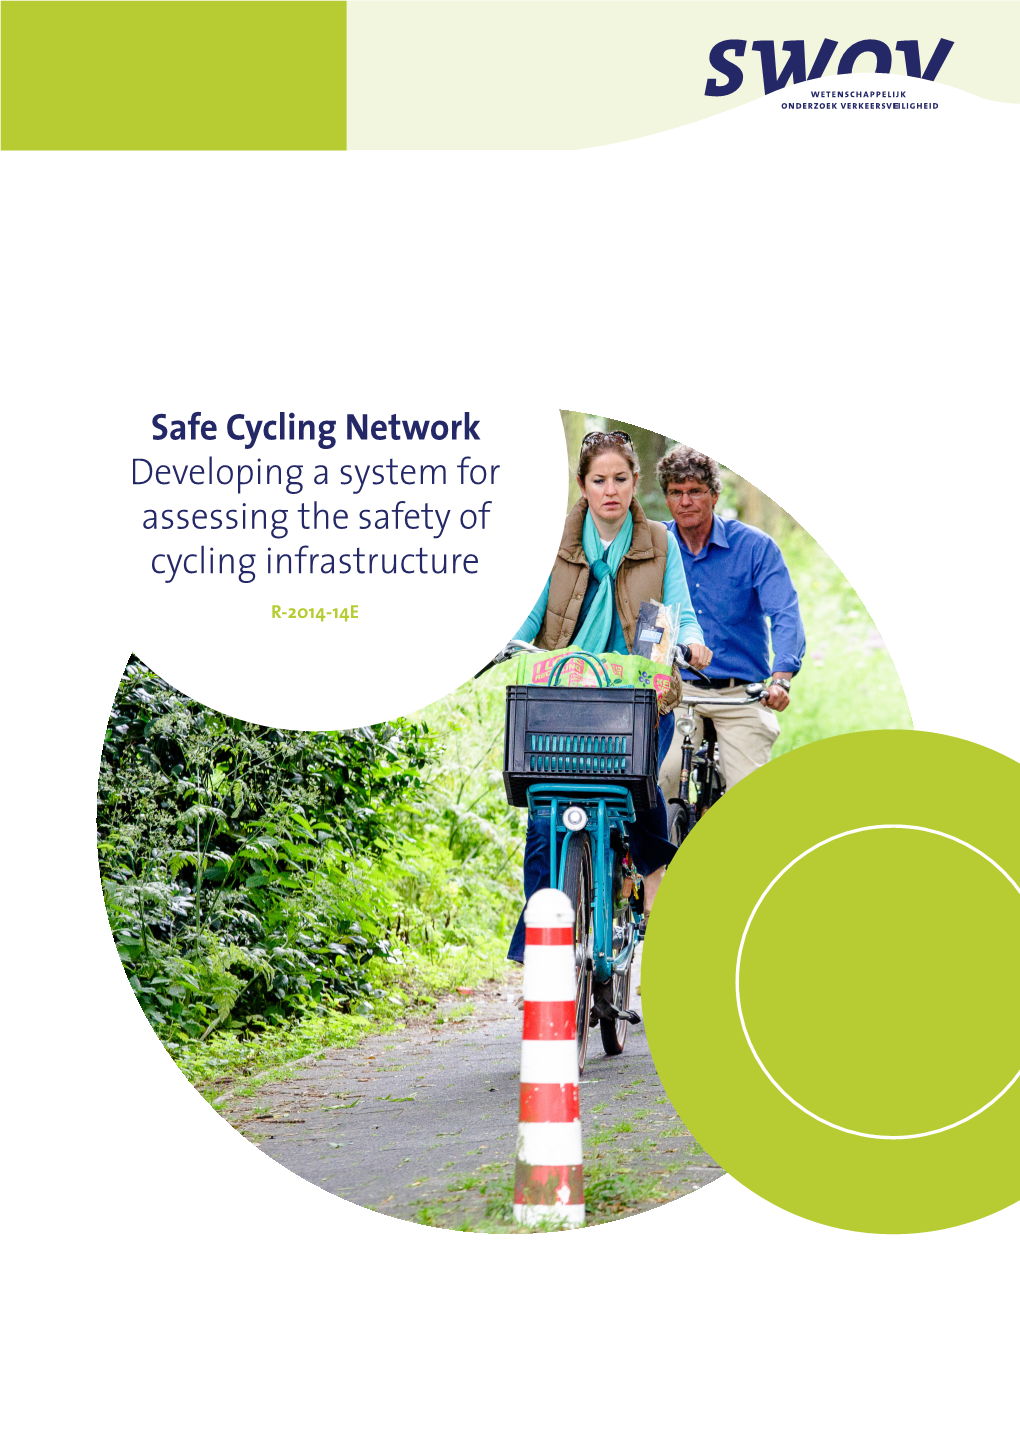 Safe Cycling Network Developing a System for Assessing the Safety of Cycling Infrastructure R-2014-14E